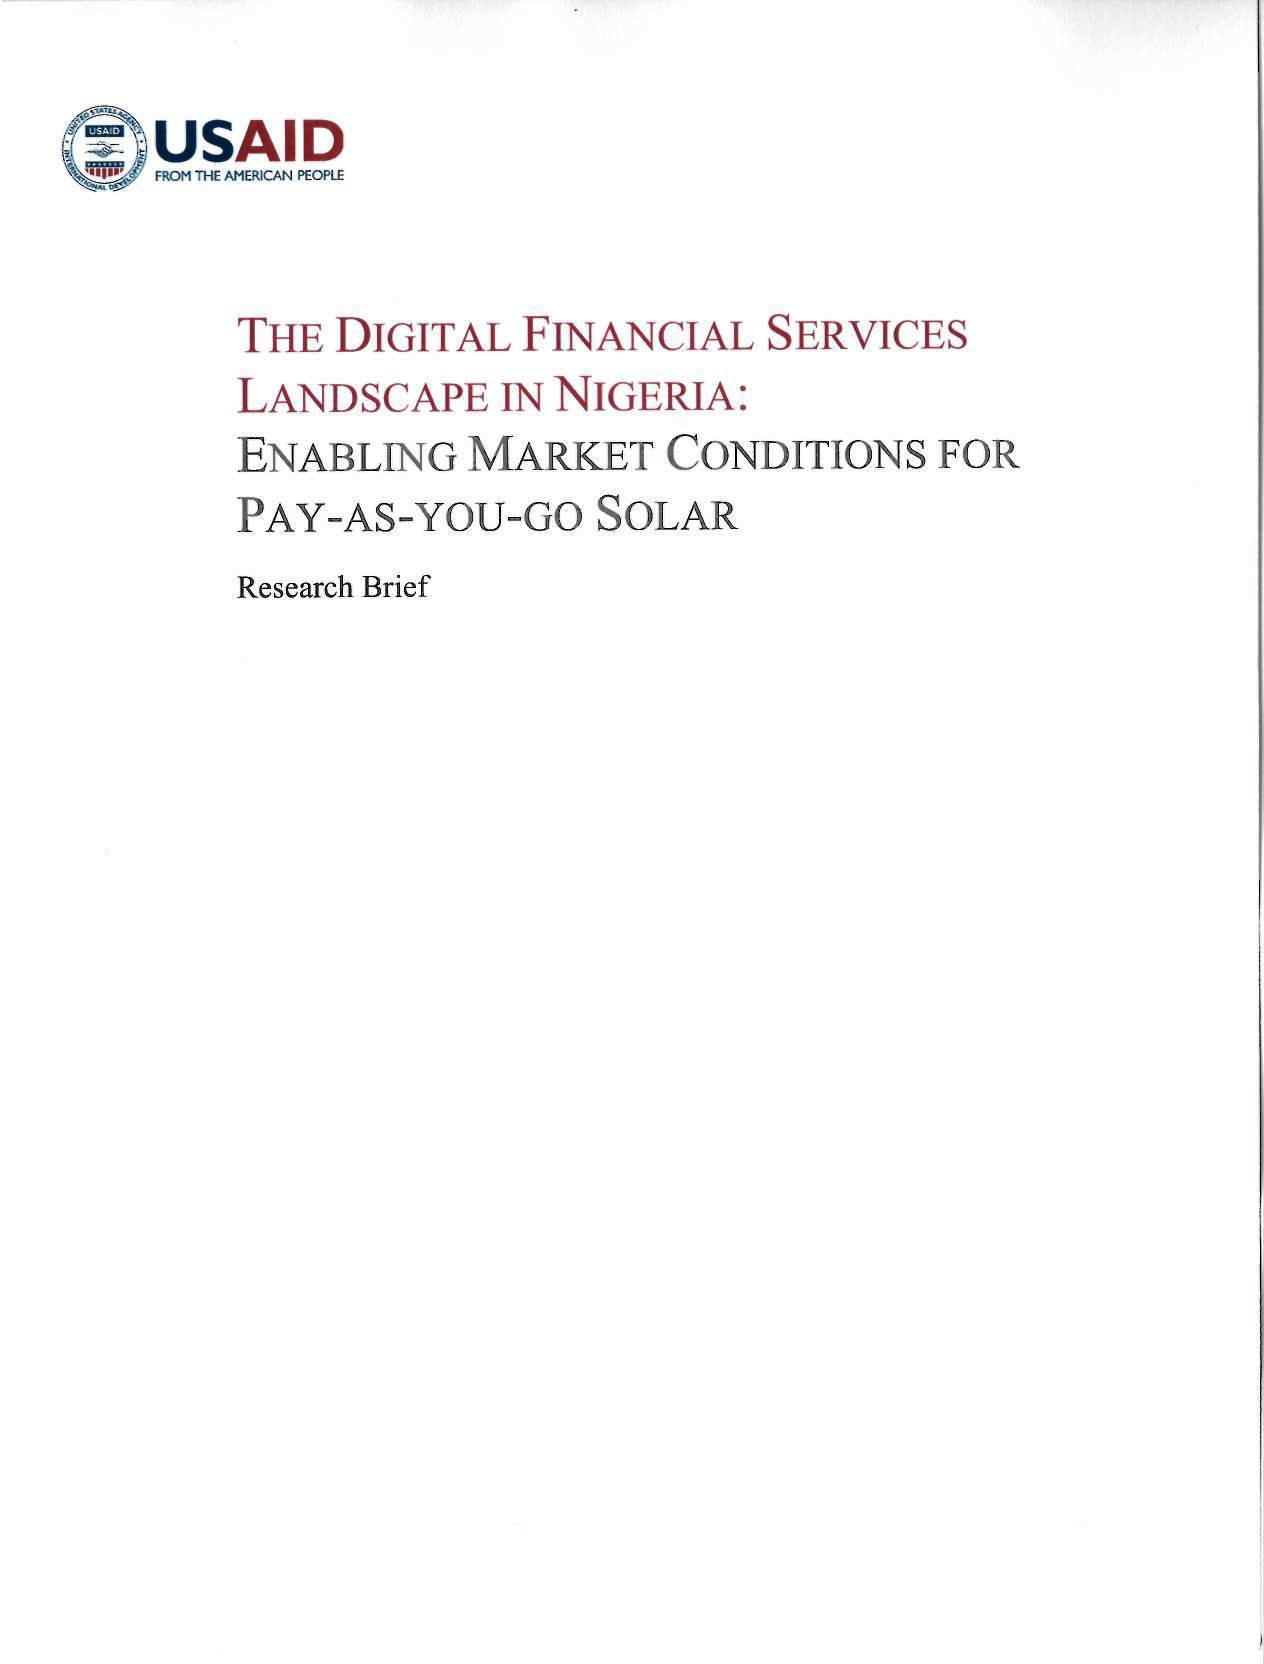 The Digital Financial Services Landscape in Nigeria: Enabling Market Conditions for Pay-as-you-go Solar - Research Brief